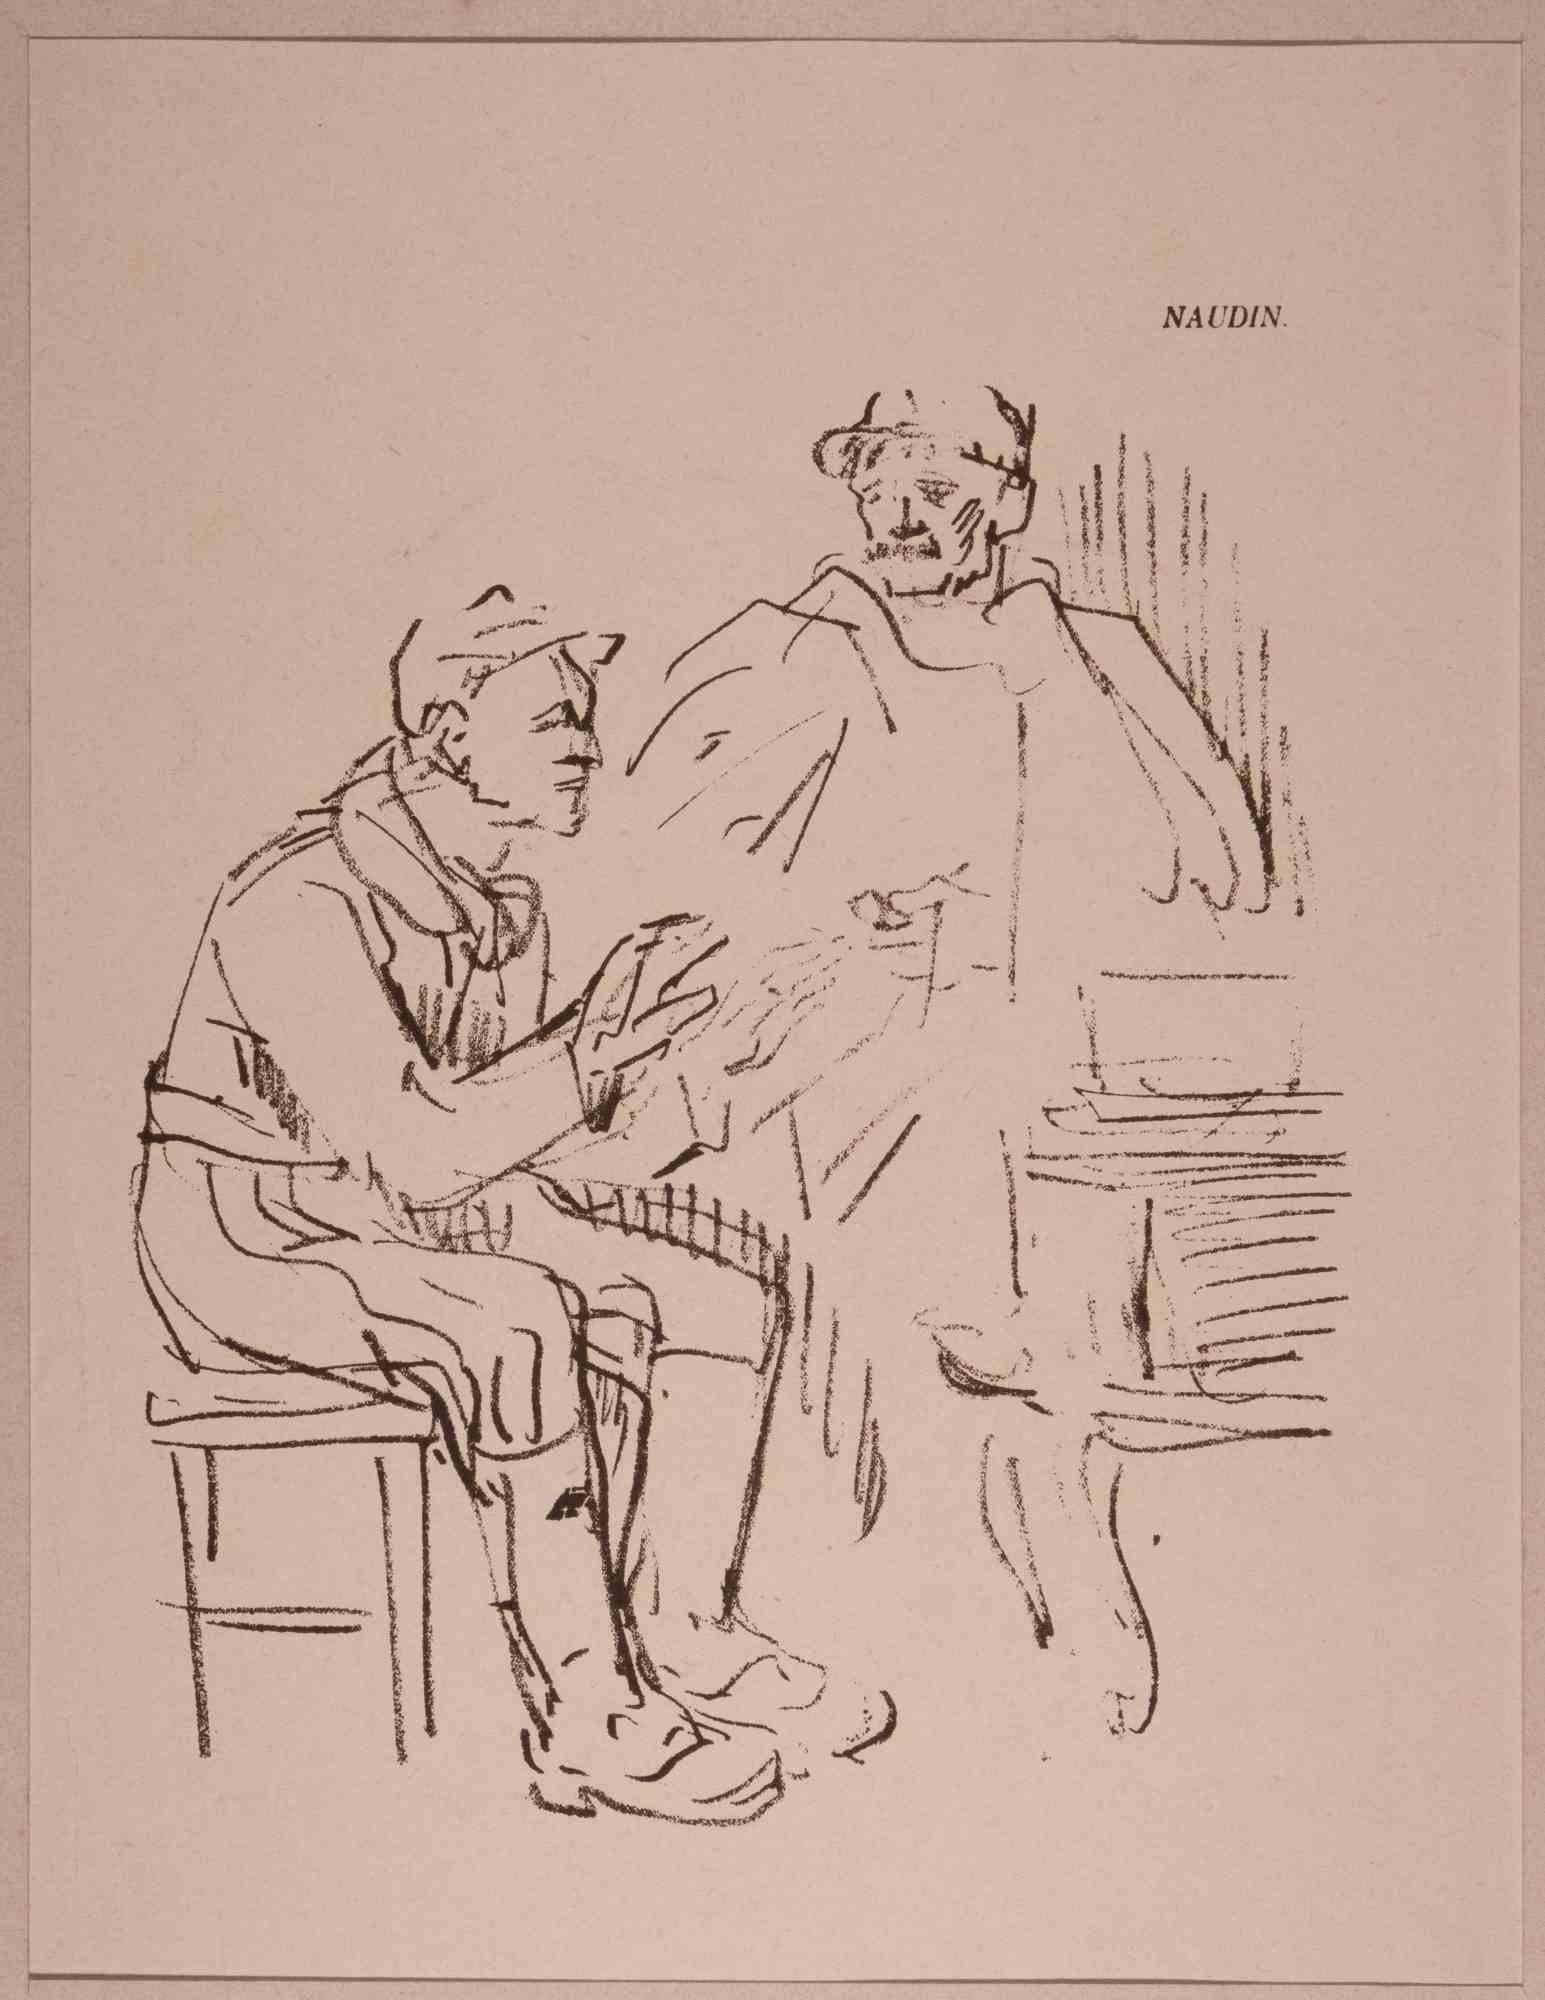 Two Friends - Lithograph by Bernard Naudin - Early 20th Century